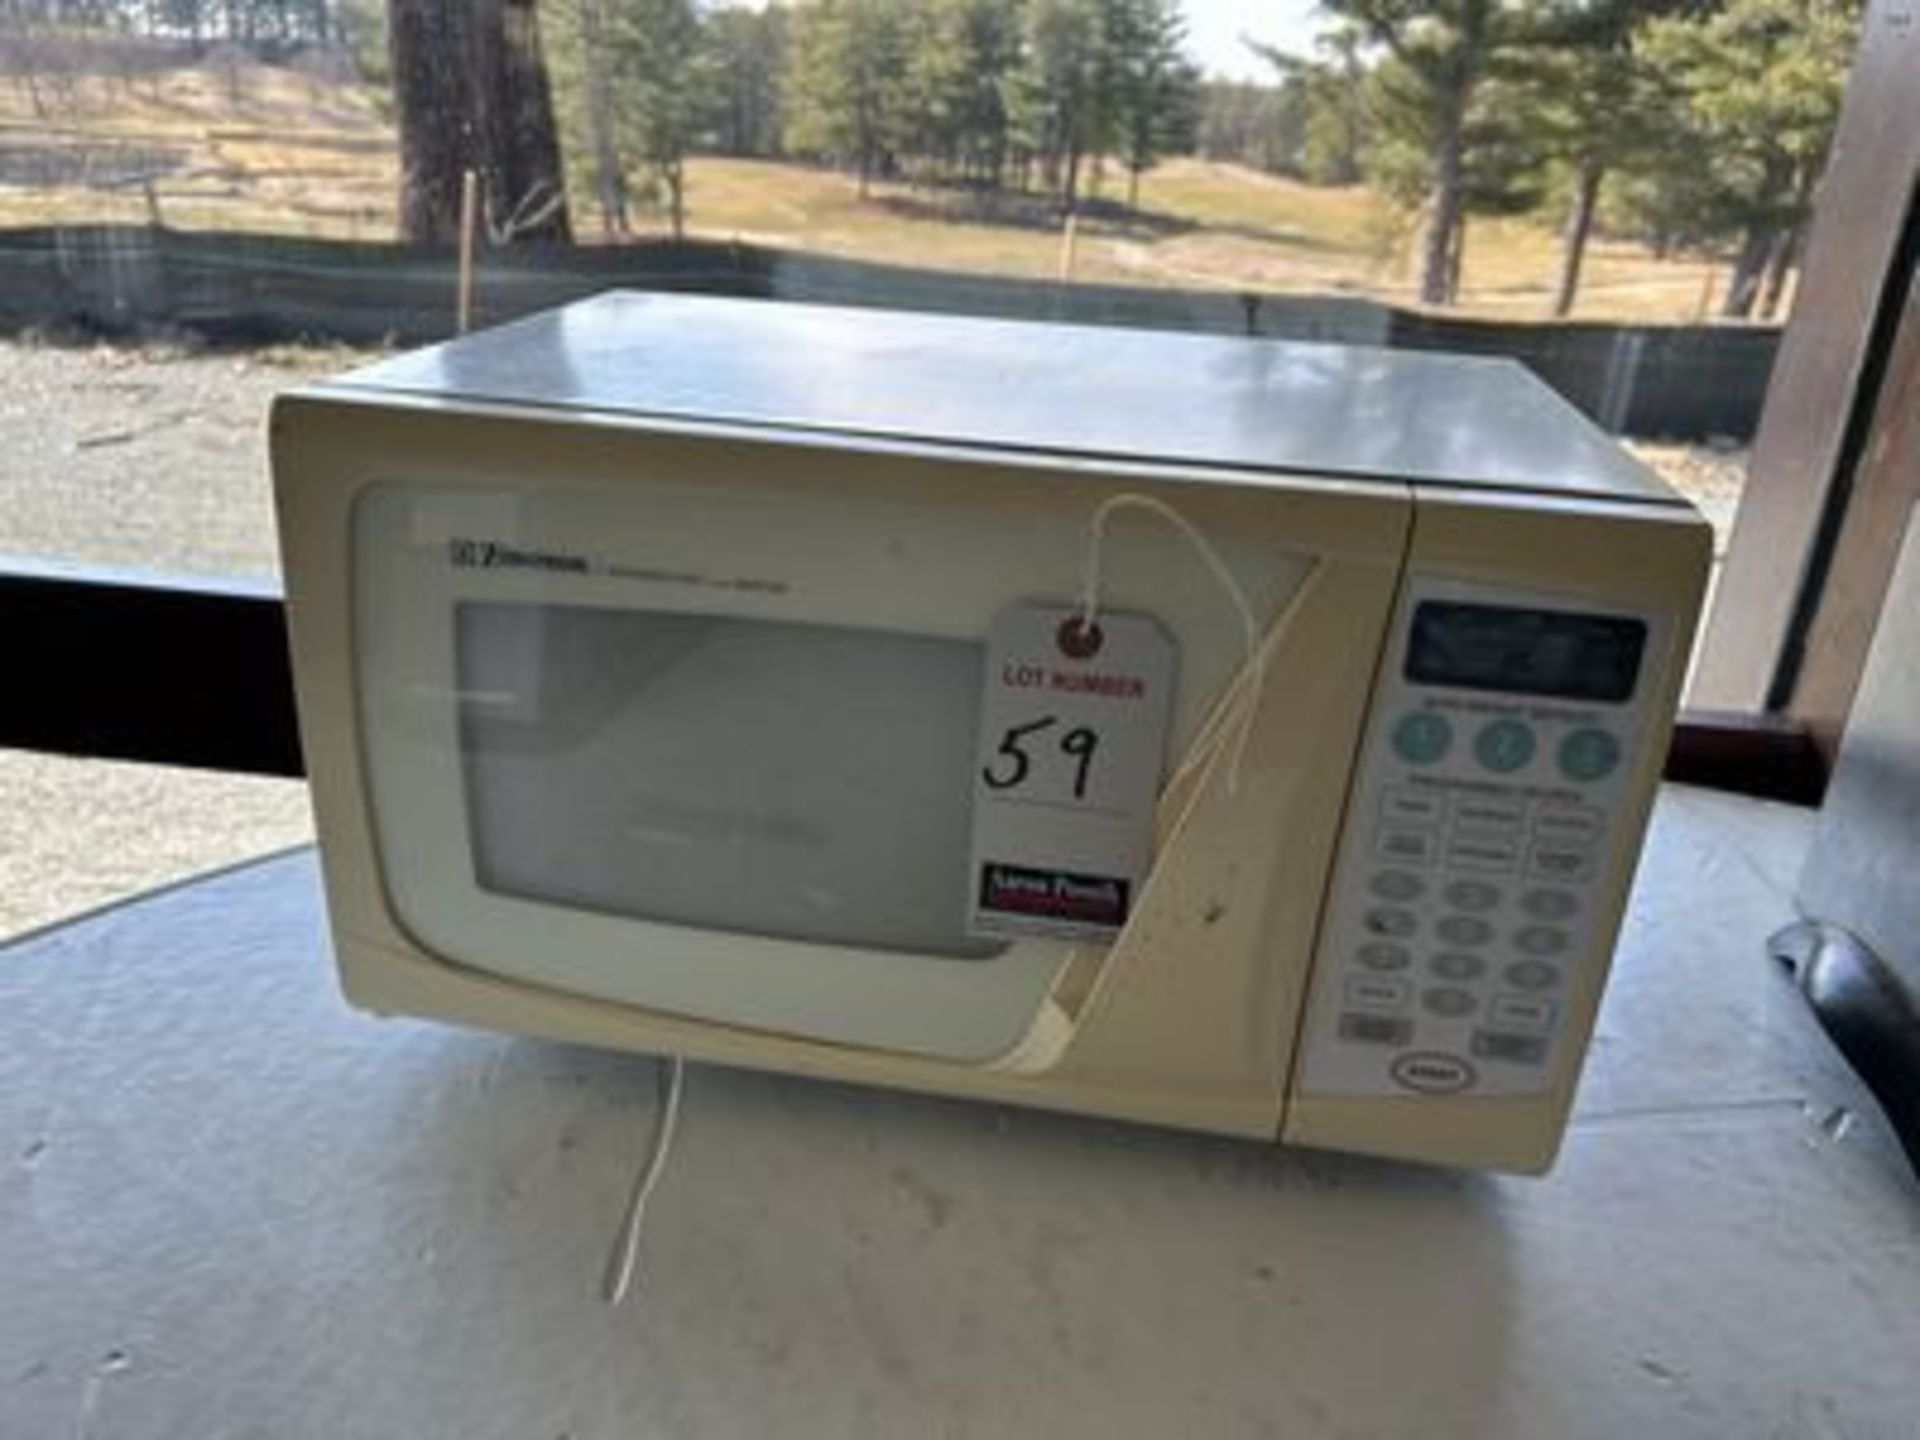 EMERSON MICROWAVE OVEN